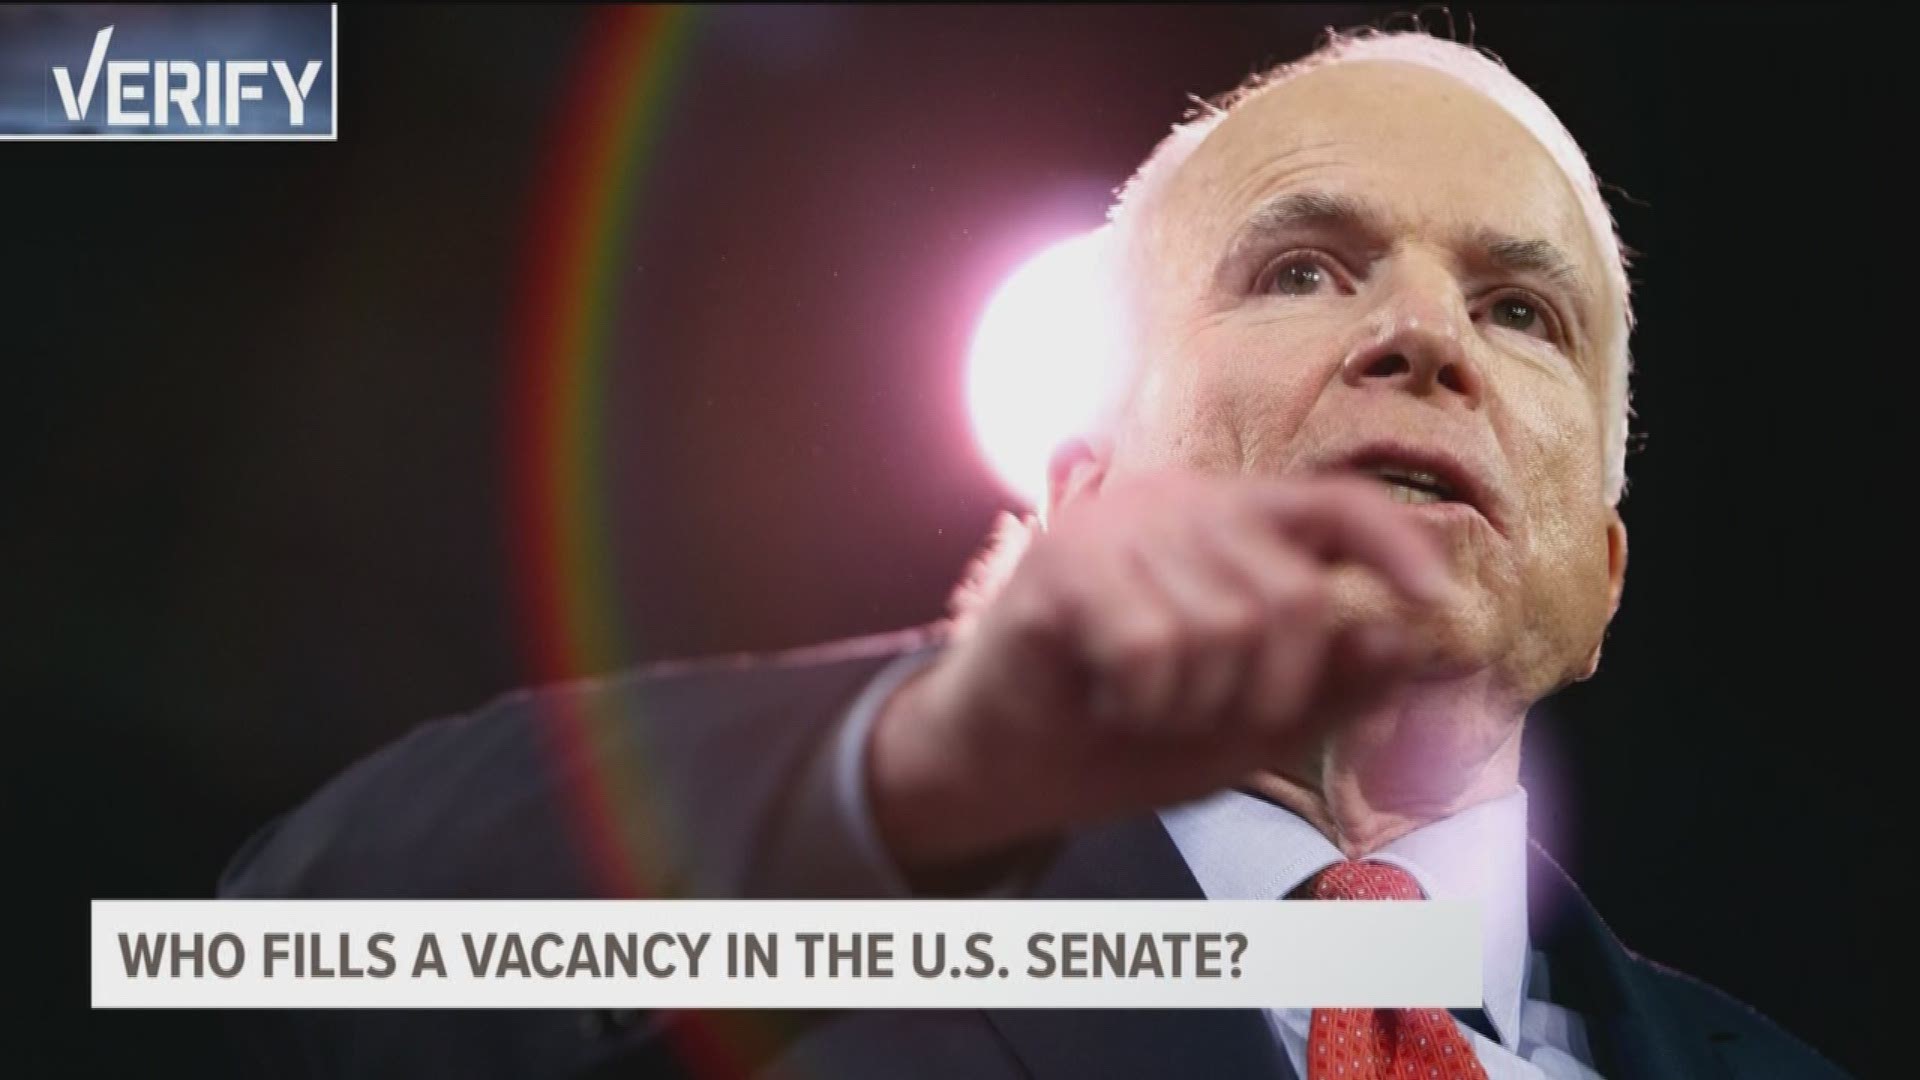 We verify a major political and legal question arising from Sen. John McCain's illness: If his U.S. Senate becomes vacant for any reason, who would fill it -- Arizona voters or the governor?